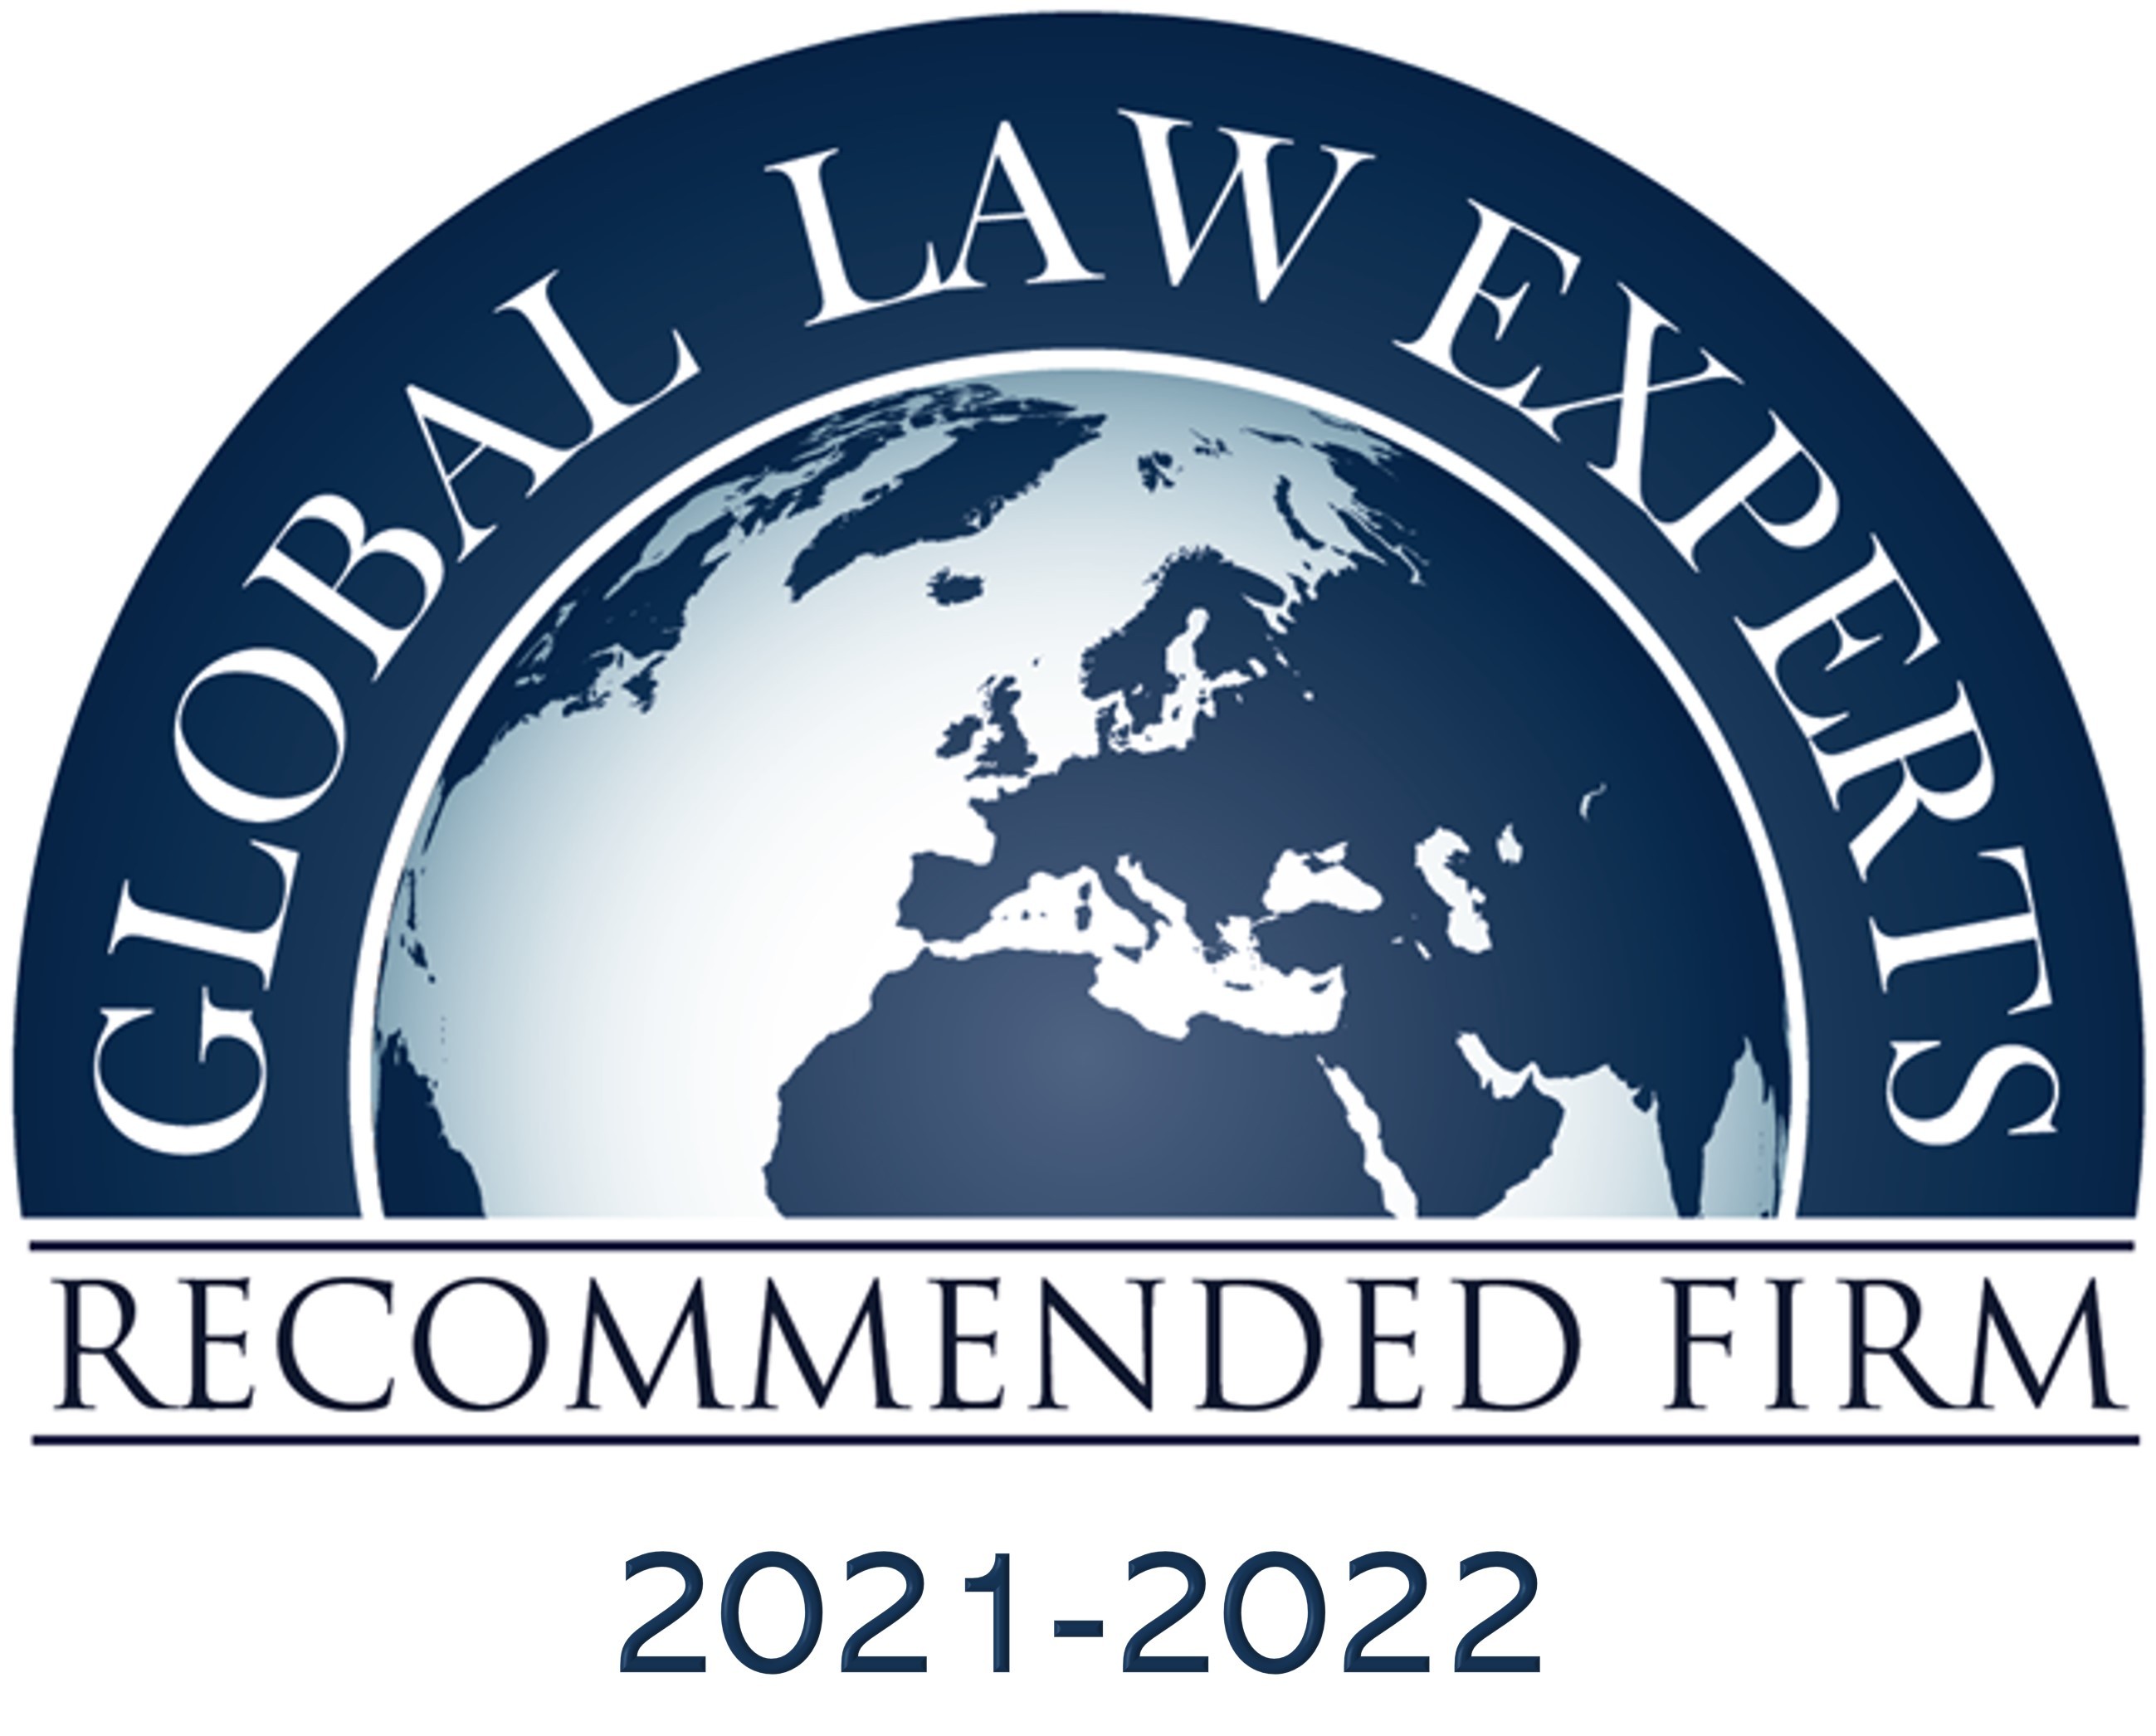 Named as an exclusive "Recommended M&A Firm" in Hong Kong by Global Law Experts, 2021/2022